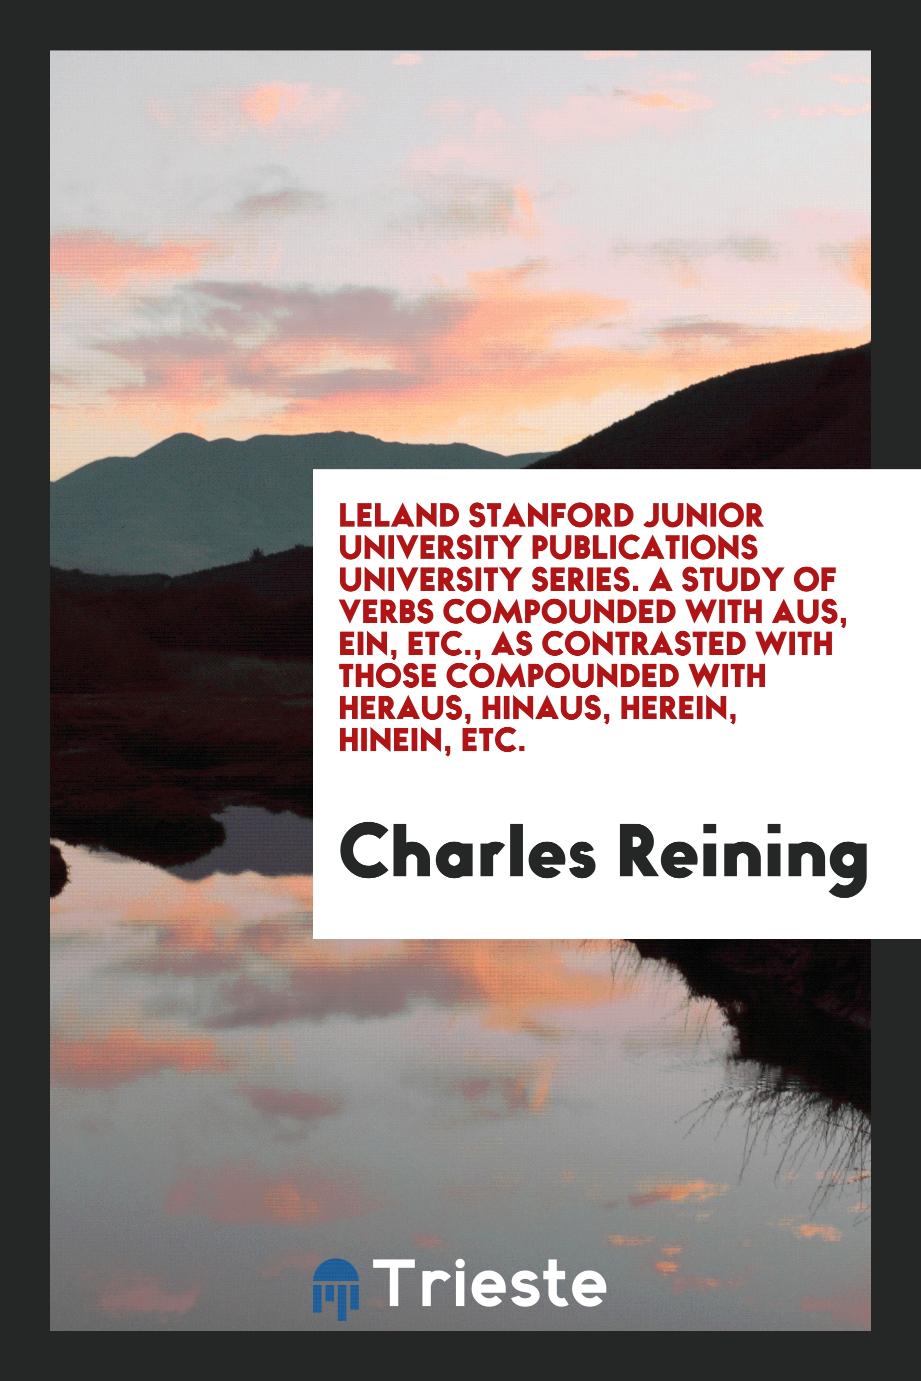 Leland Stanford Junior University Publications University Series. A Study of Verbs Compounded with Aus, Ein, Etc., as Contrasted with Those Compounded with Heraus, Hinaus, Herein, Hinein, Etc.